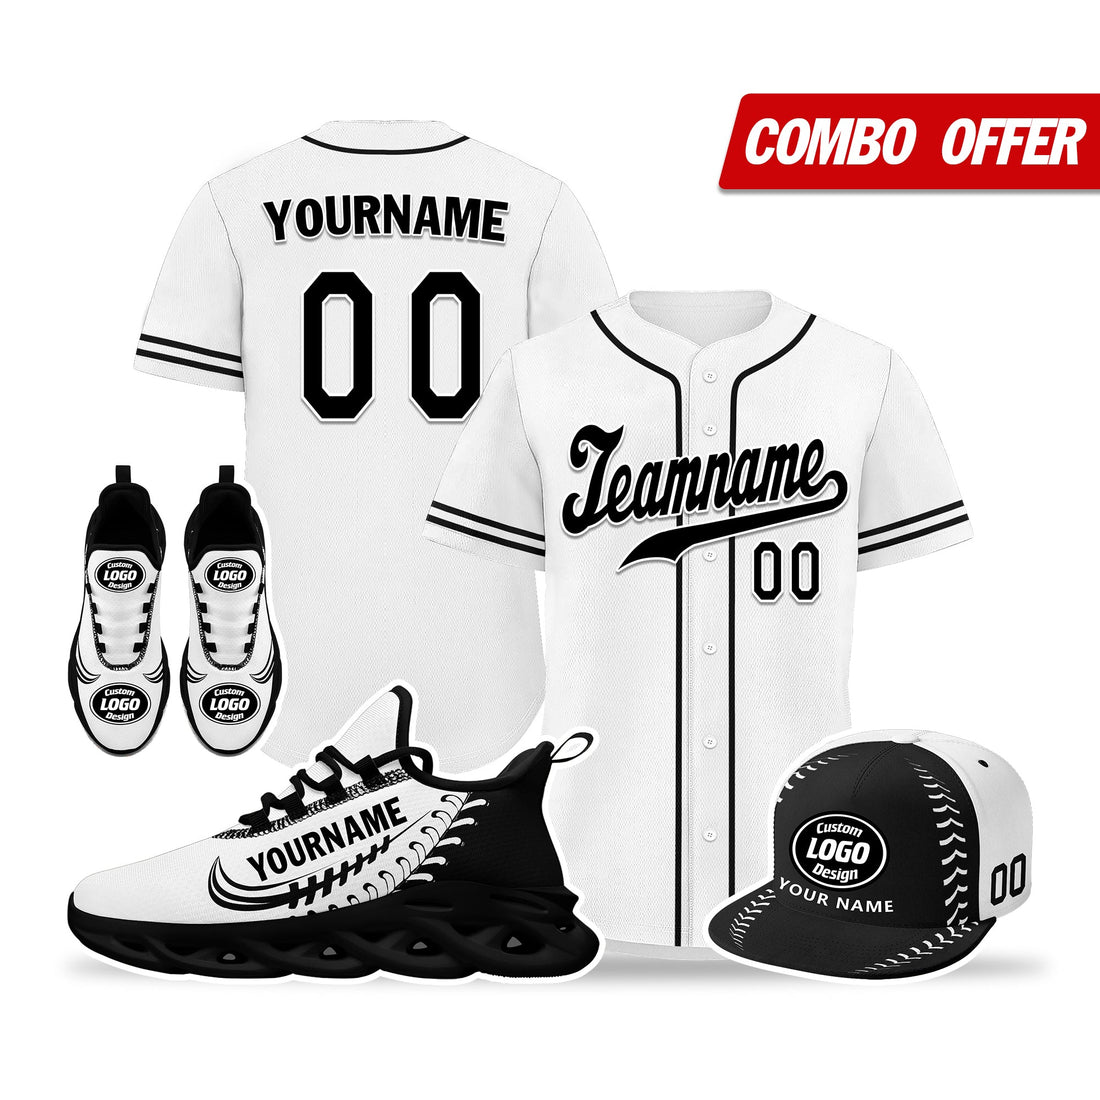 Custom White Jersey MaxSoul Shoes and Hat Combo Offer Personalized ZH-bd0b00e0-bf